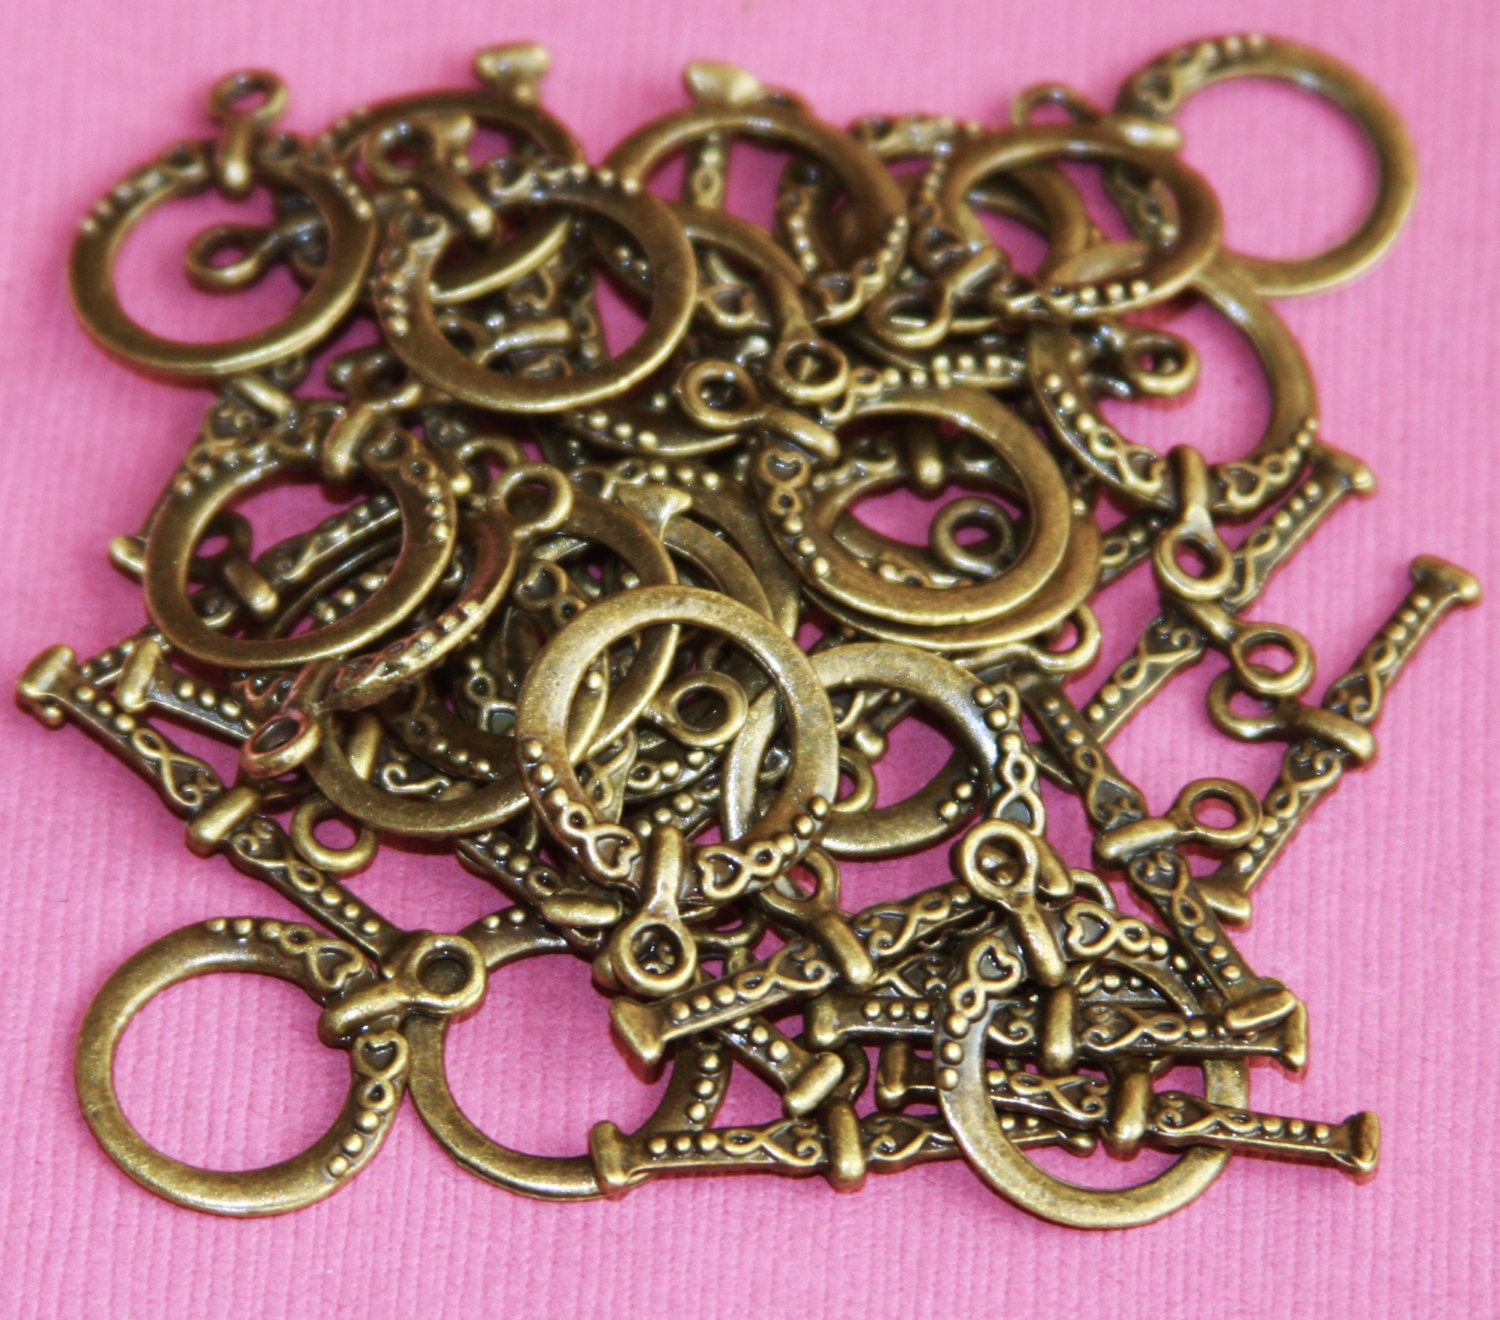 50 Sets Of Antiqued Brass Fancy Toggle Clasps 18x15mm